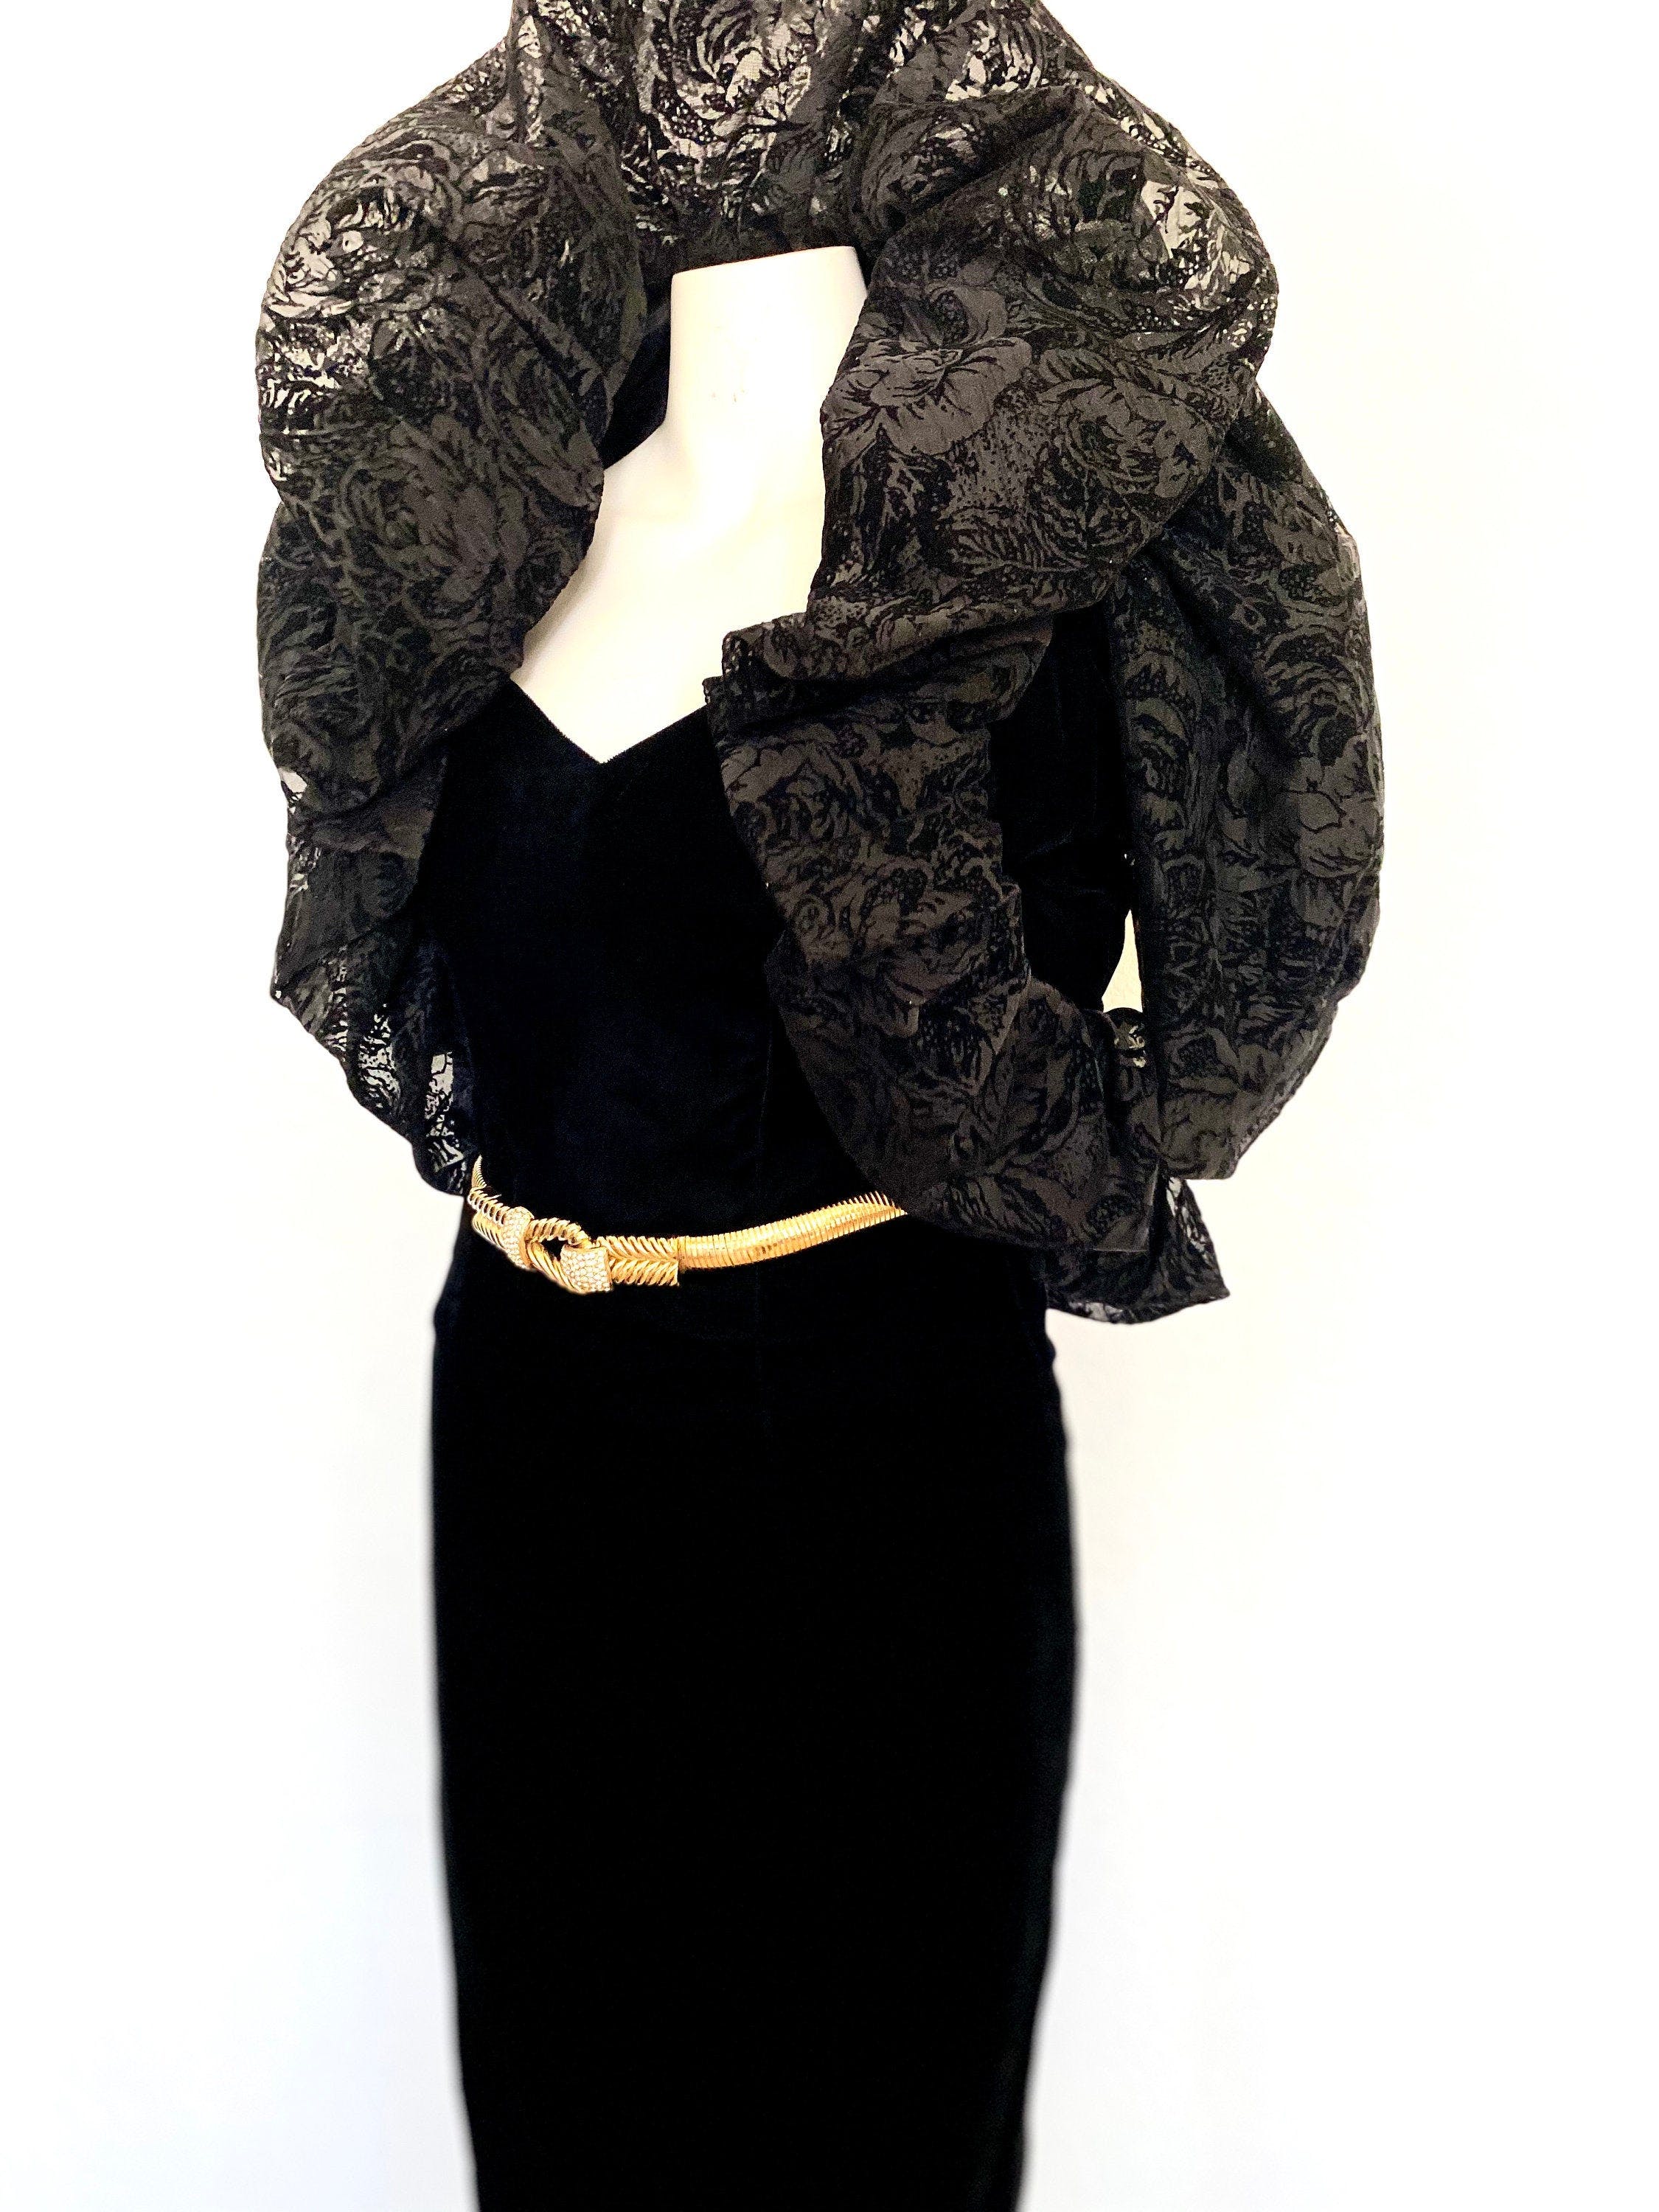 Vintage 80's Black and Gray Structural Skirt Set by B. B. collections ...